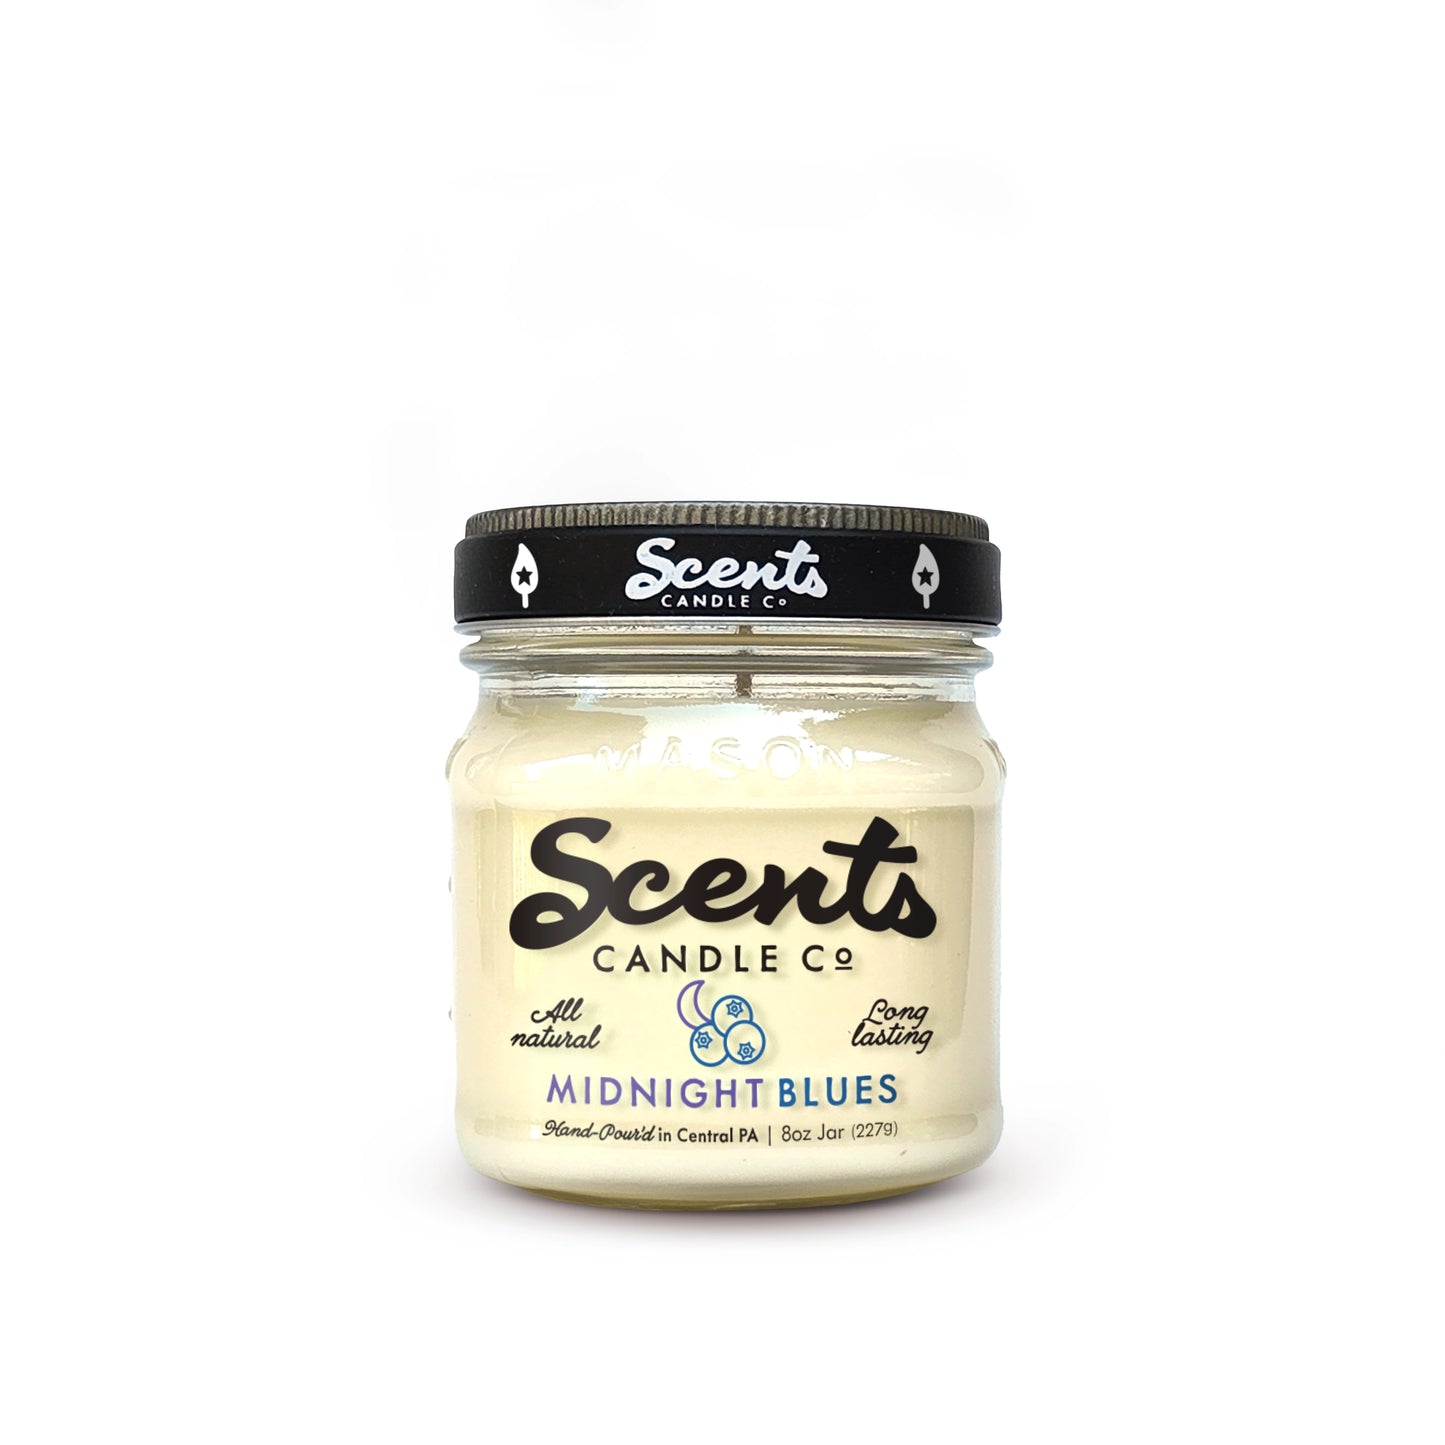 Scents Candle Co. Midnight Blues Soy Wax Candles